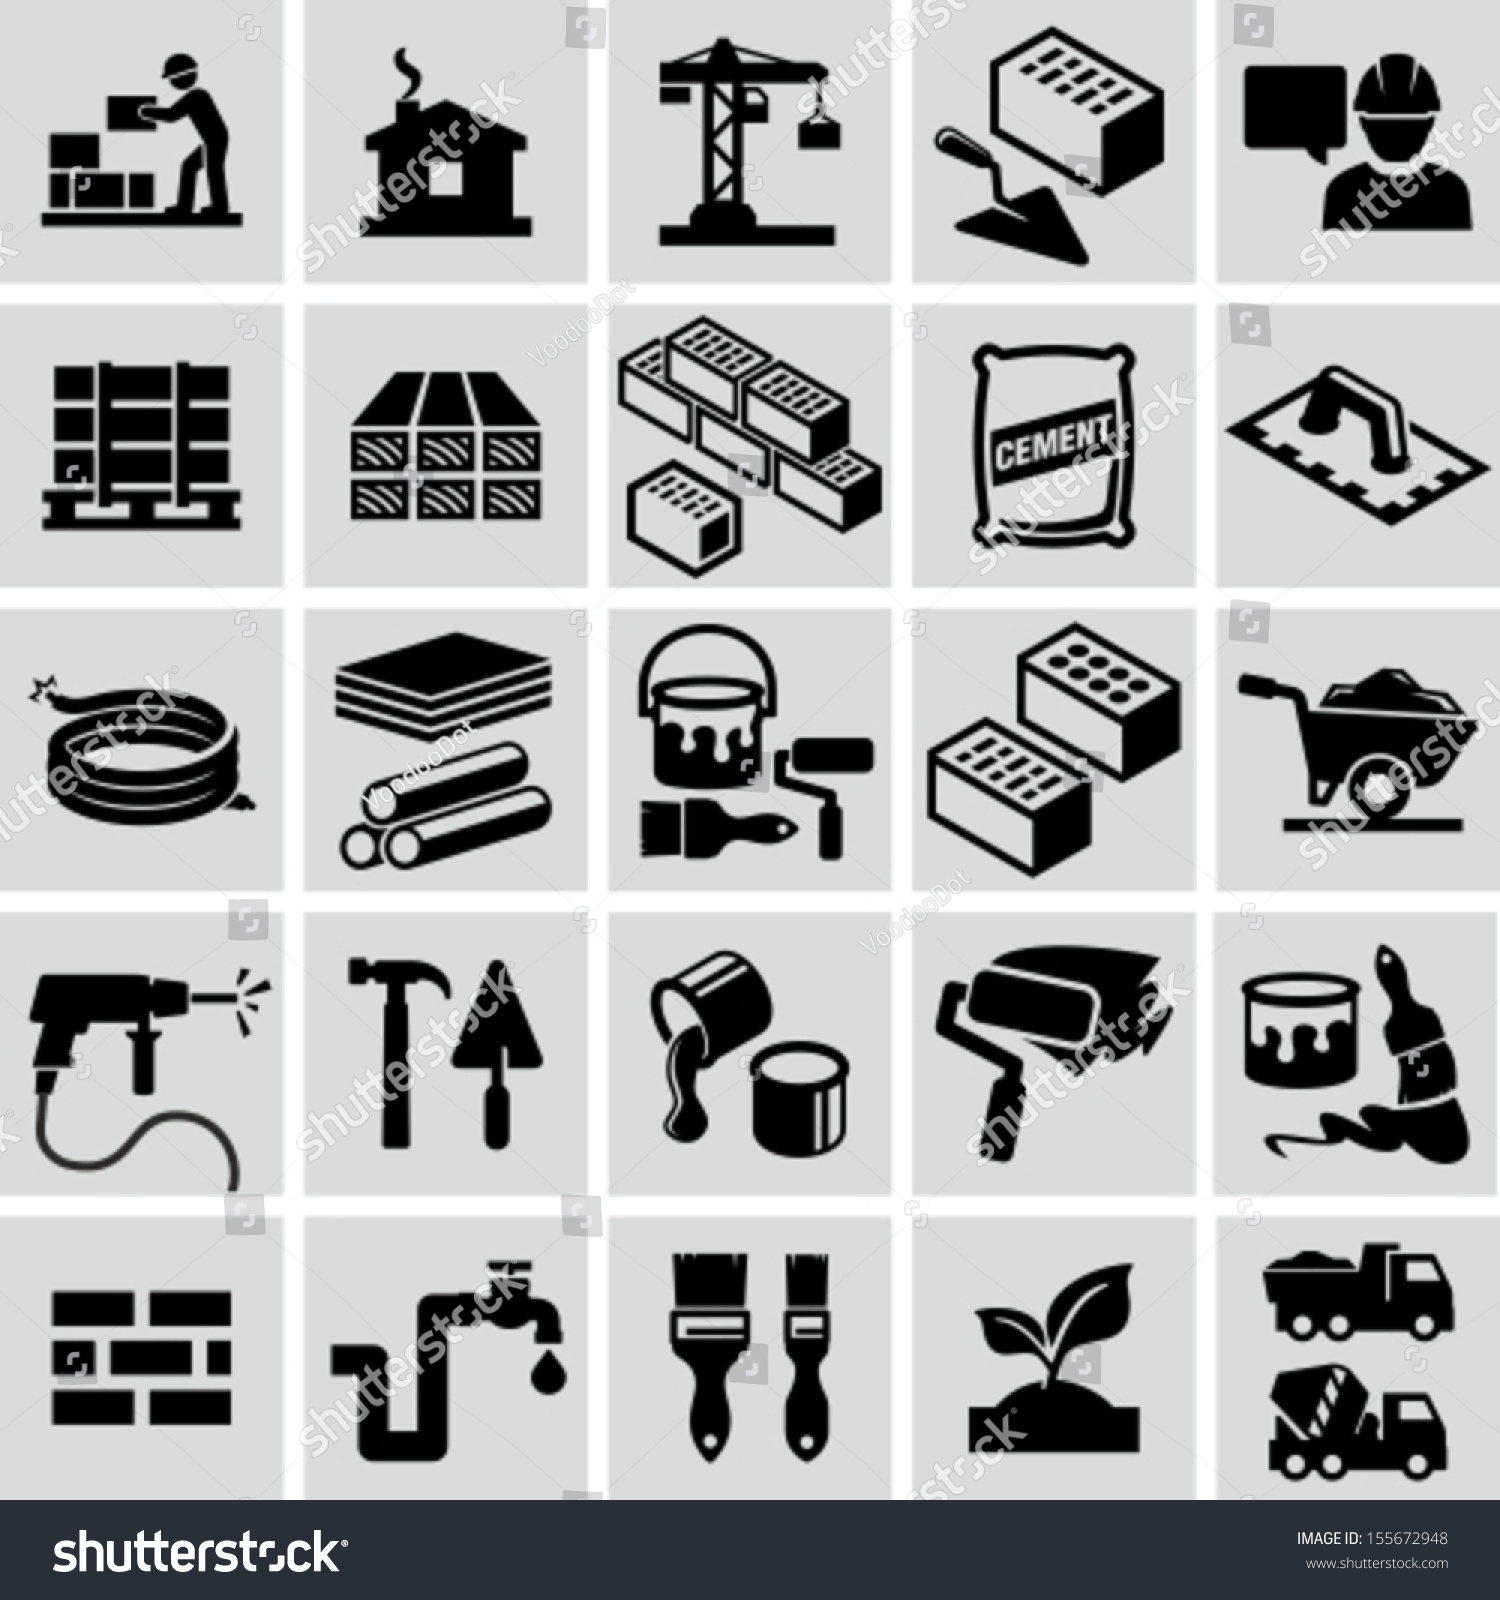 Construction, building materials, construction equipment icons #155672948